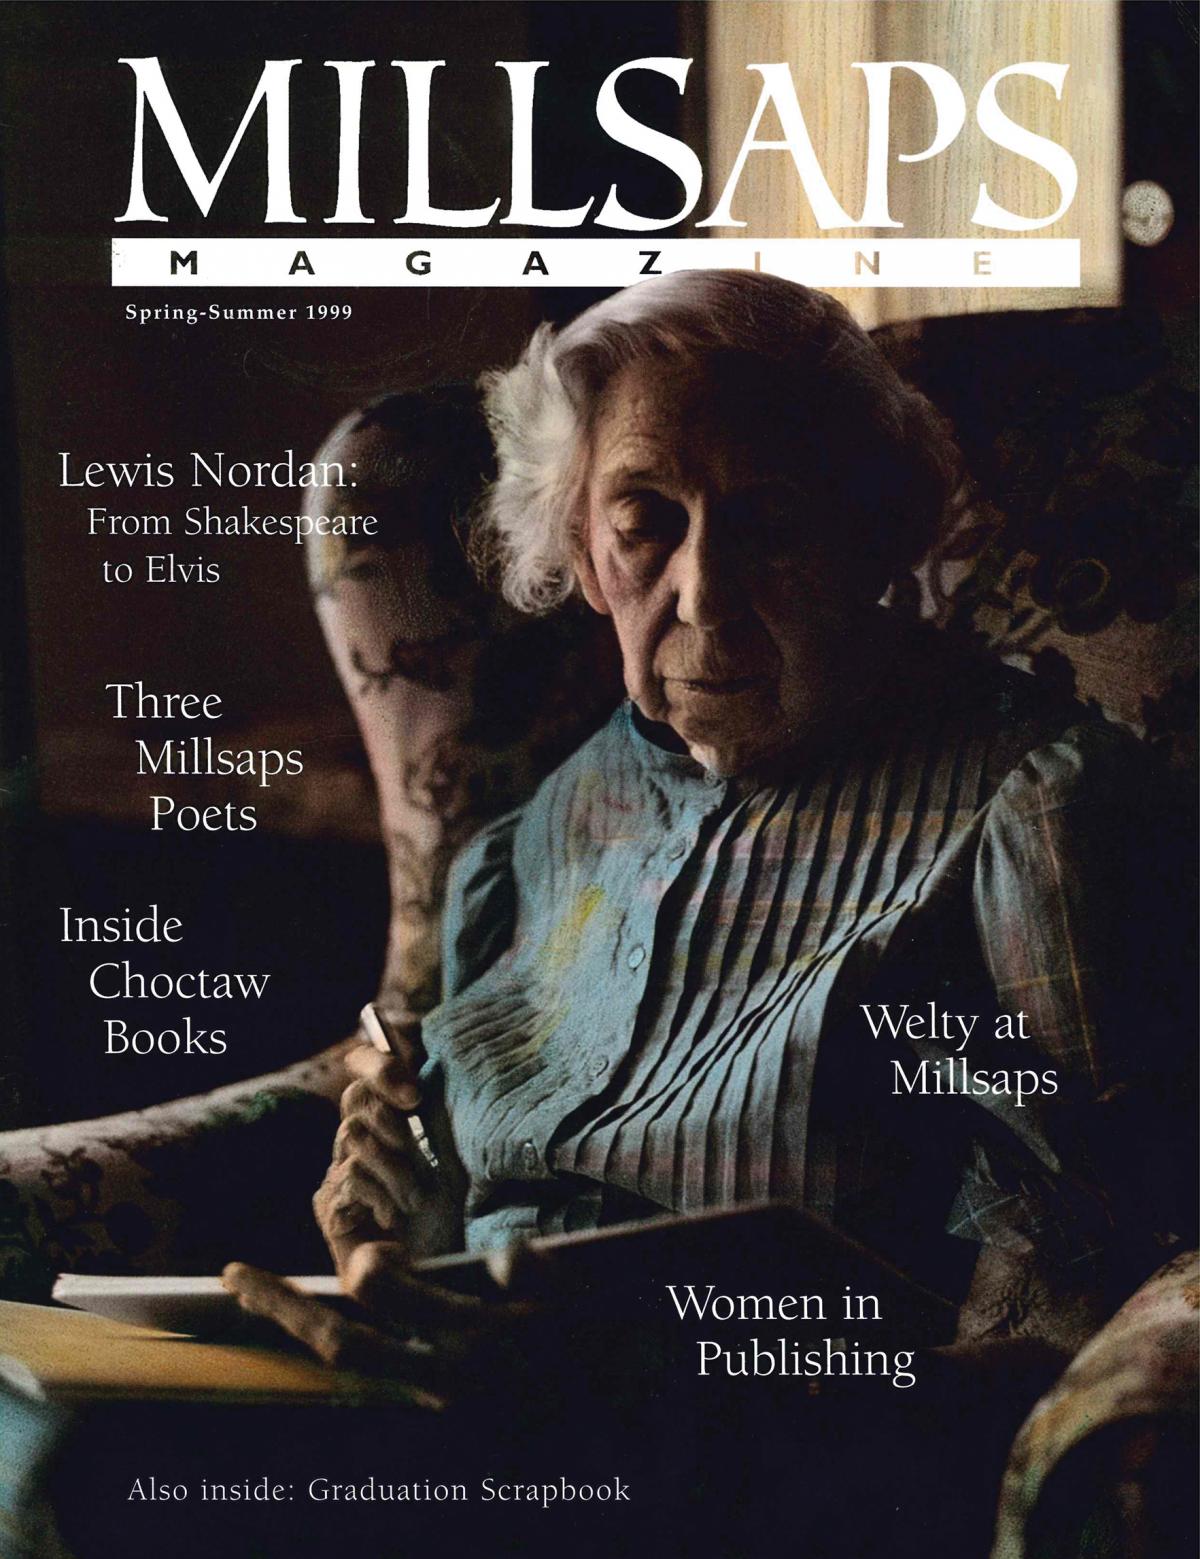 magazine cover of an older woman sitting in a chair